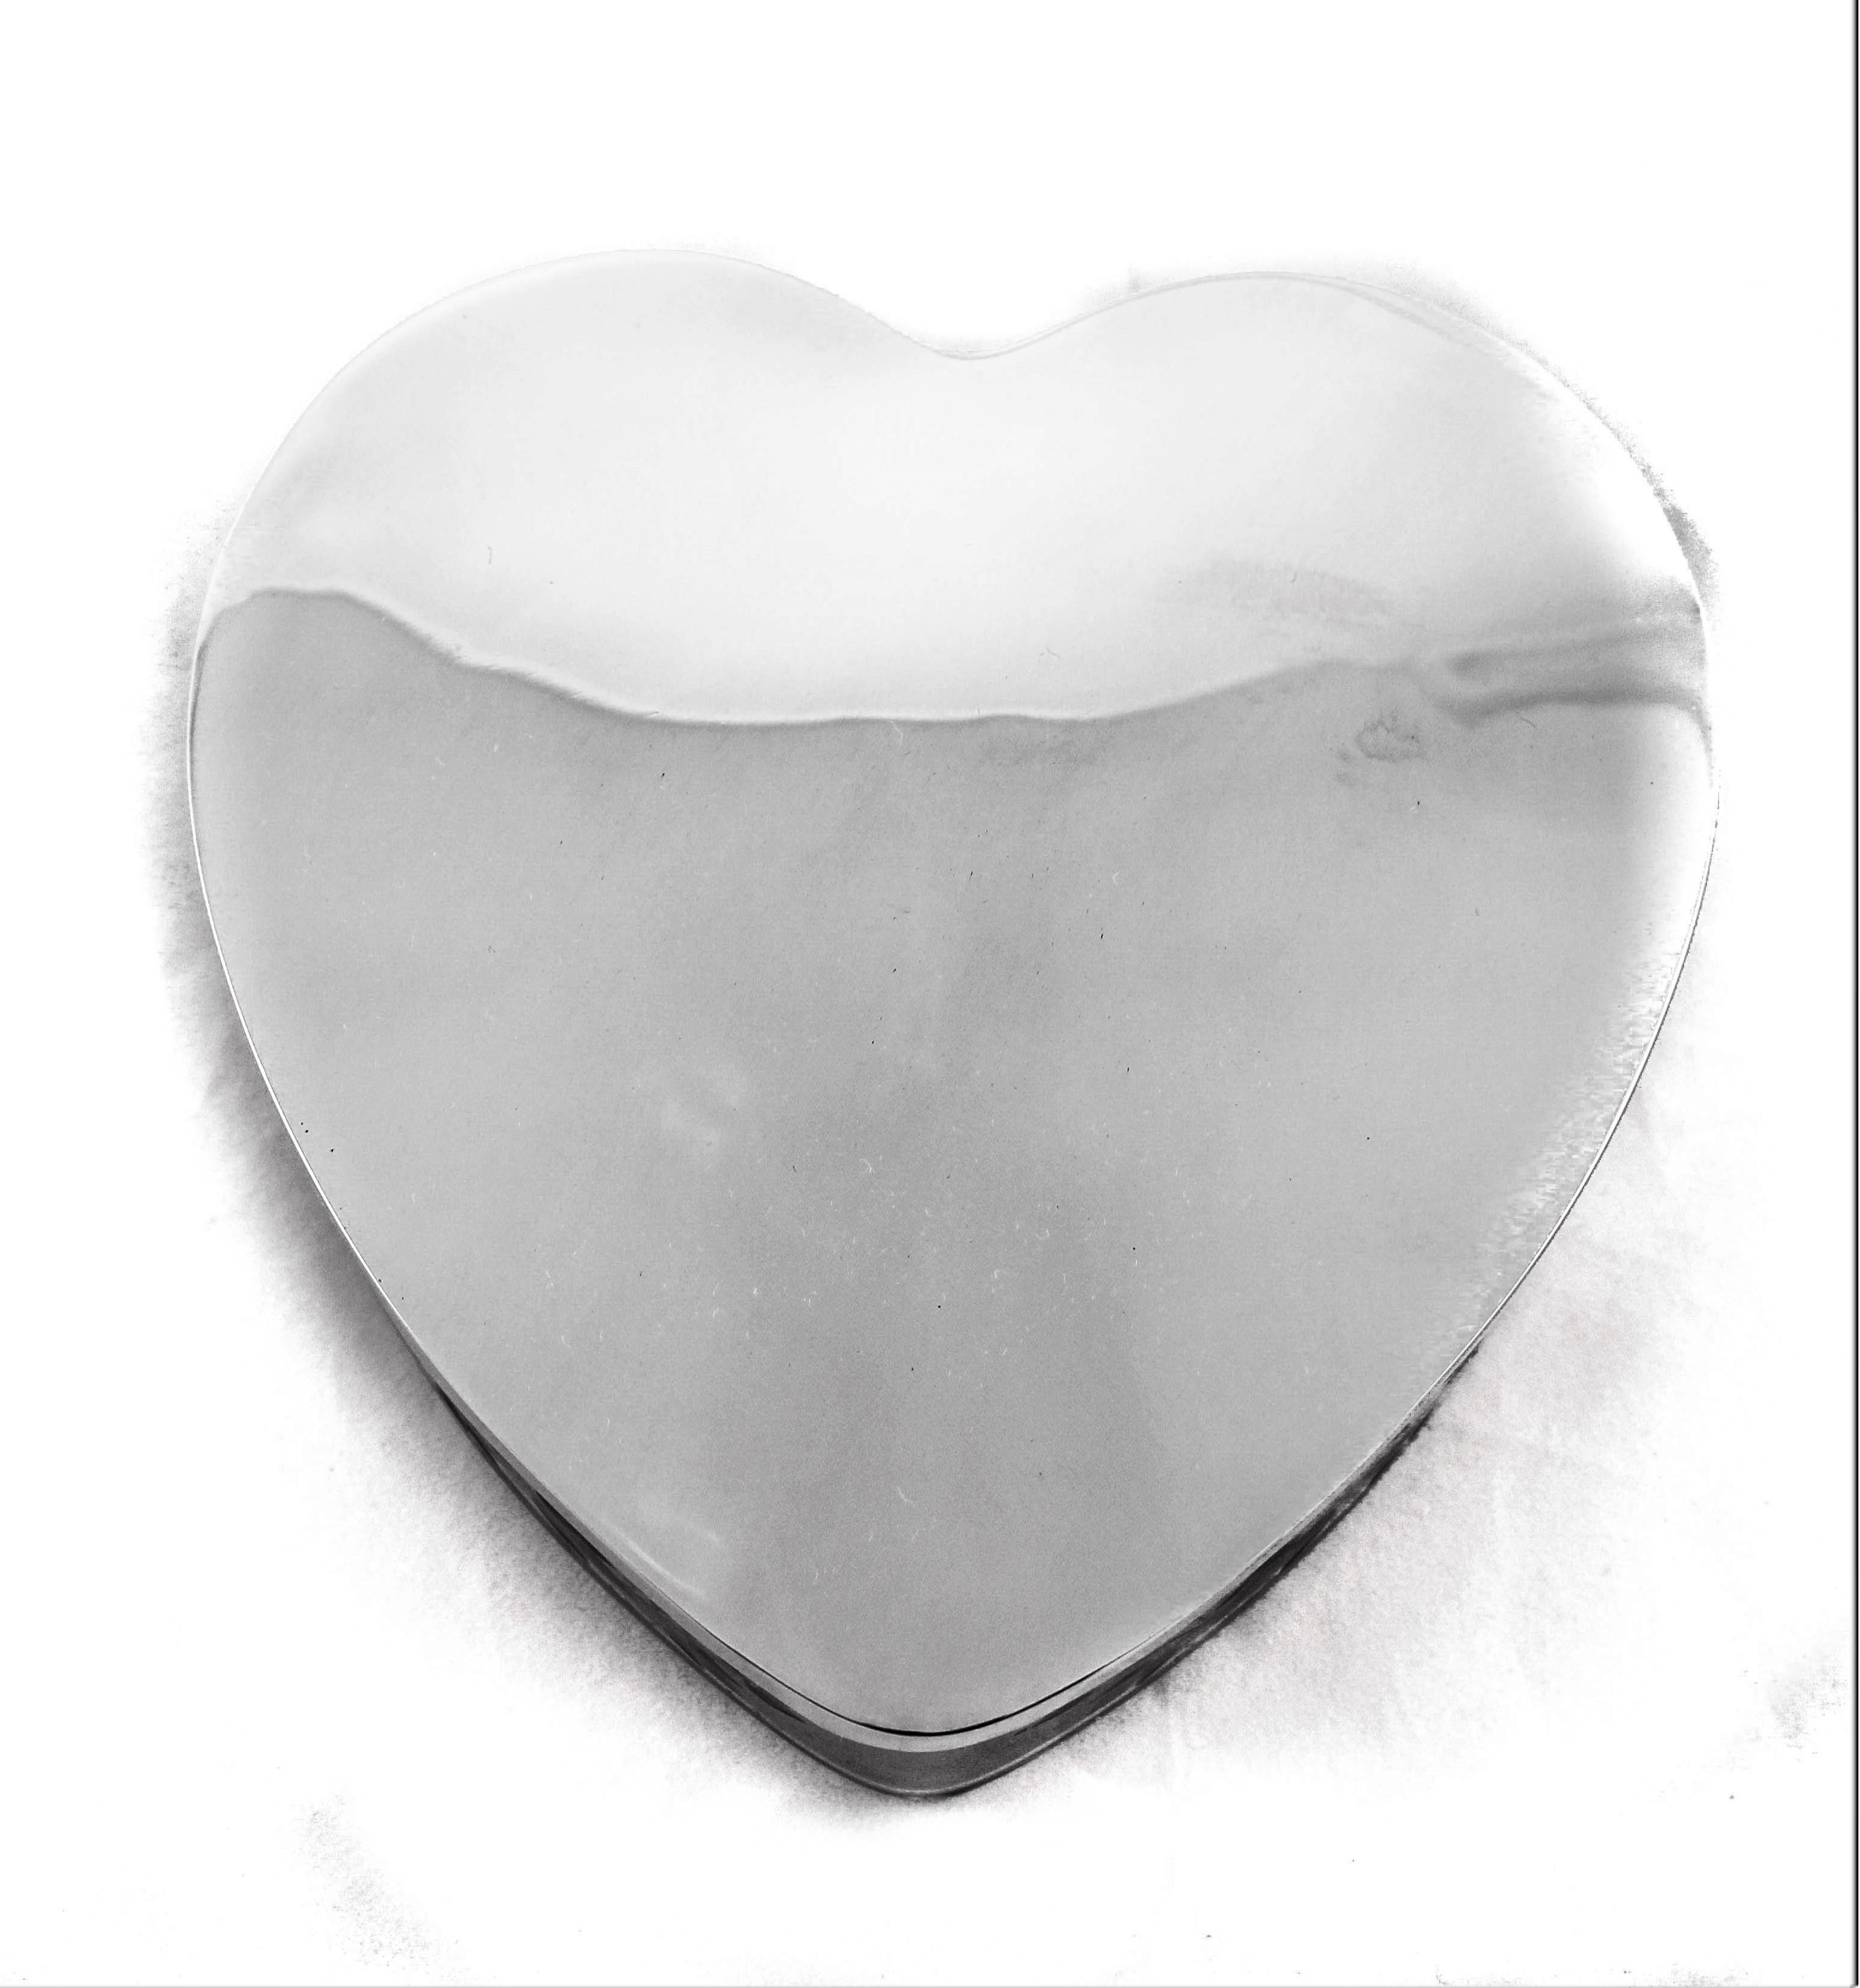 There is more than one way to tell that special someone, I love you. Why not say it with something she will keep and cherish forever? This adorable heart-shaped jewelry box is the perfect gift! A sleek modern cover juxtaposed with the delicate